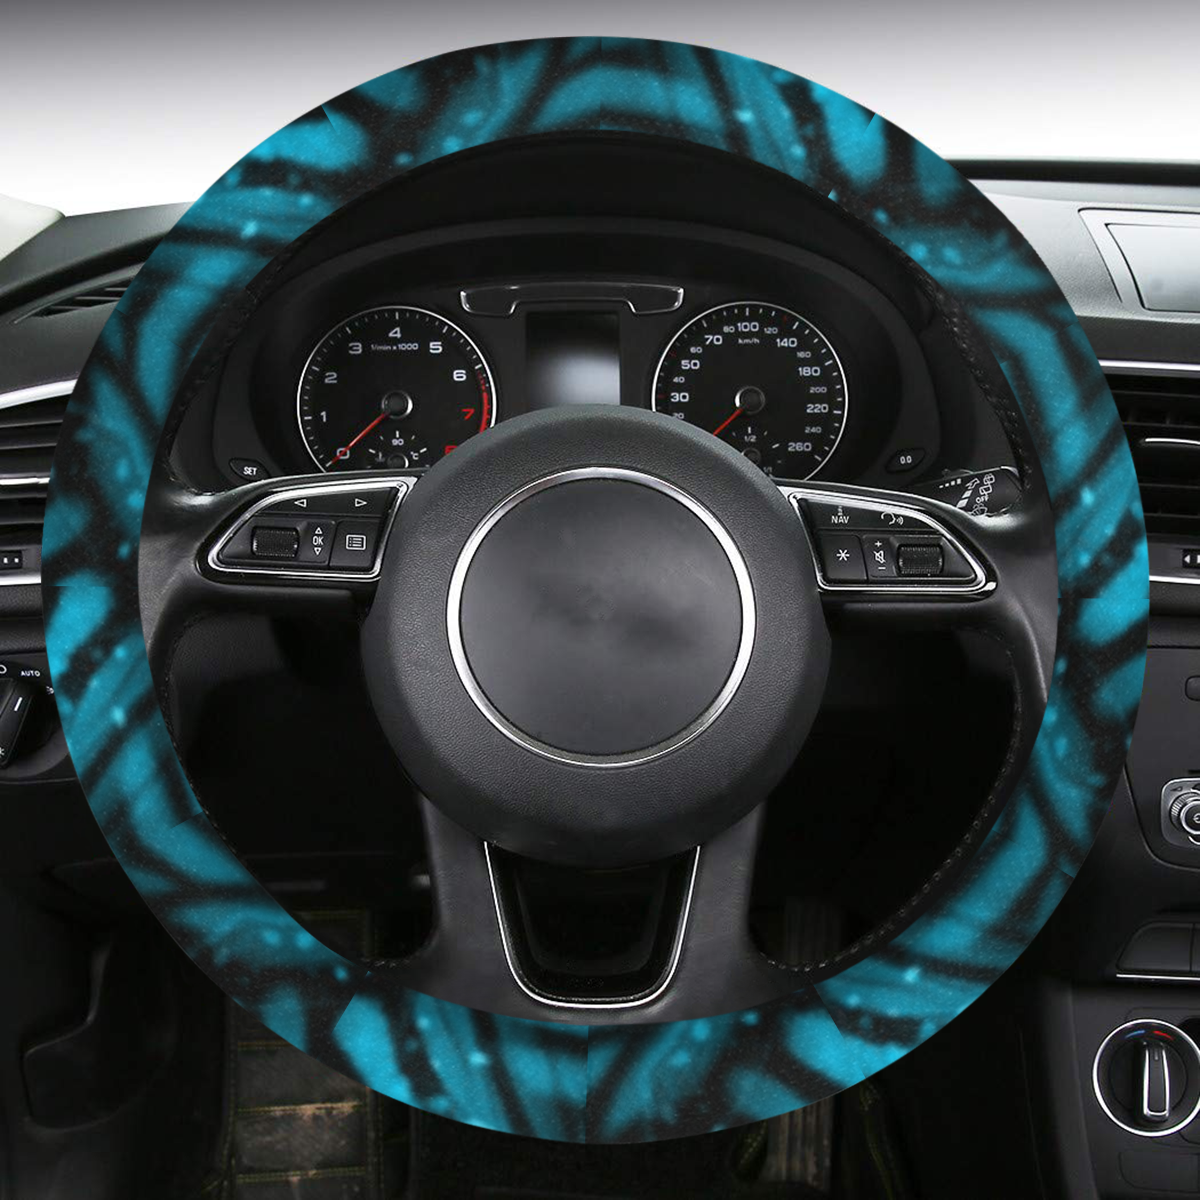 Butterfly Wing Steering Wheel Cover with Anti-Slip Insert